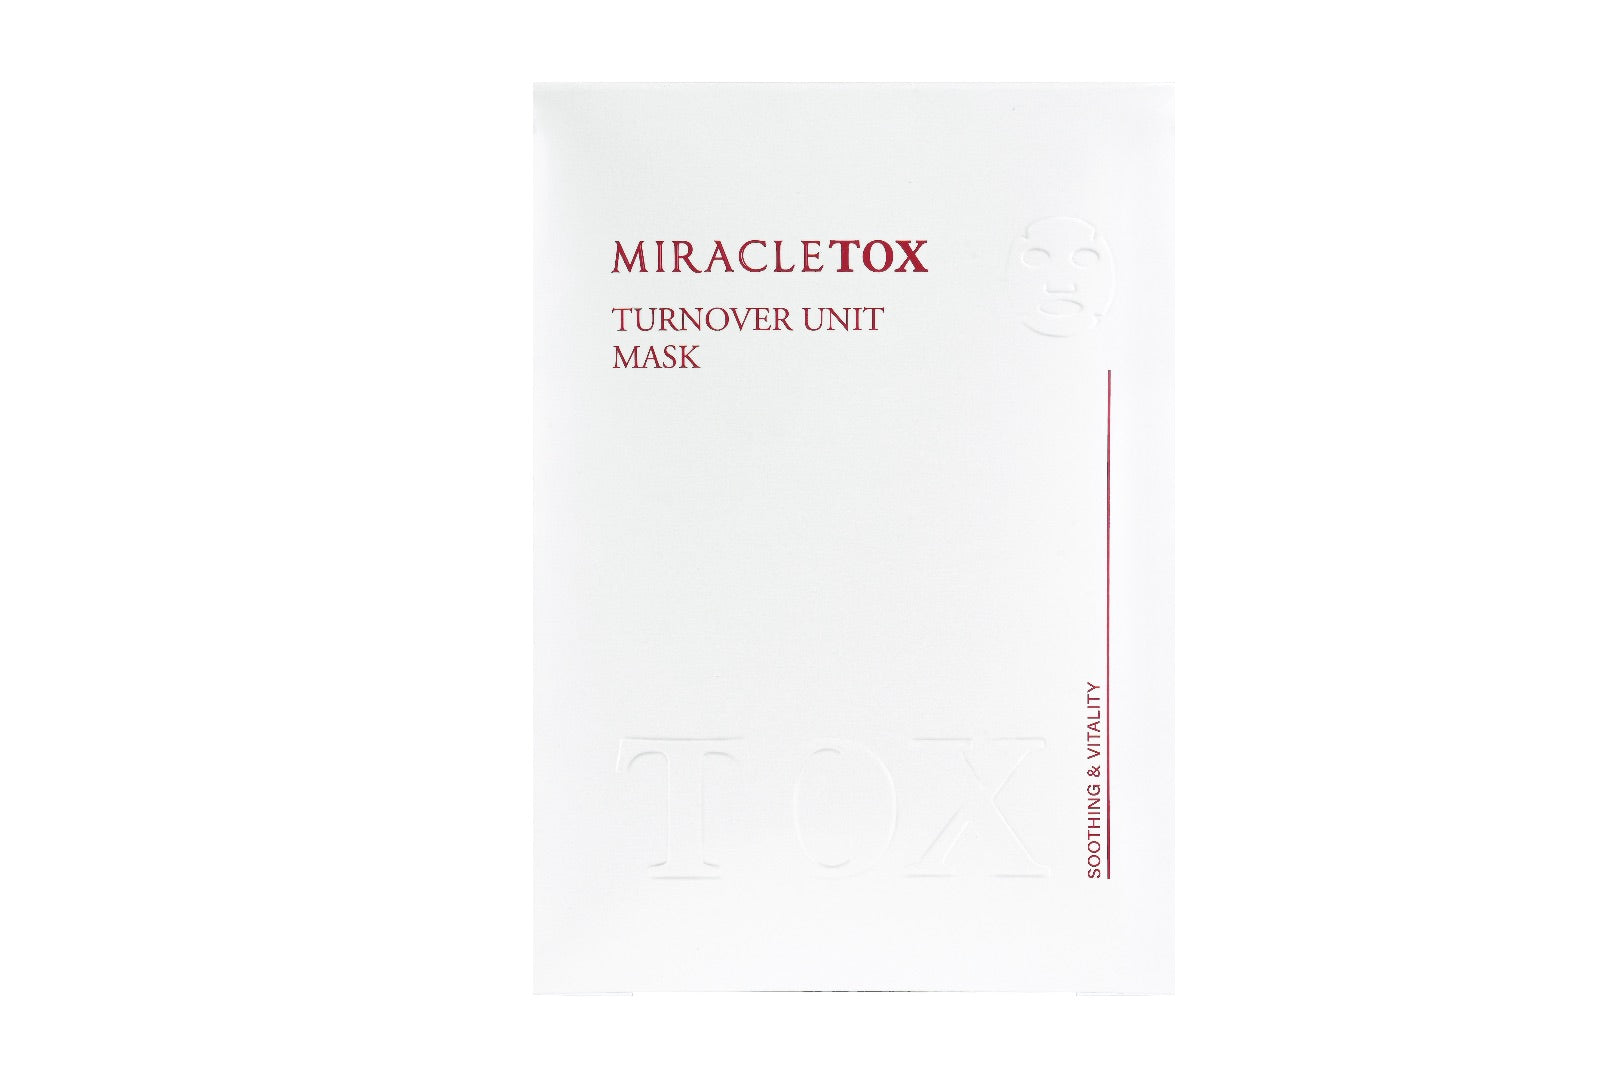 Achieve Radiant, Youthful Skin: MIRACLETOX TURNOVER Facial Mask - Reduce Wrinkles, Brighten Skin, and Experience Ultimate Hydration. Shop Now!